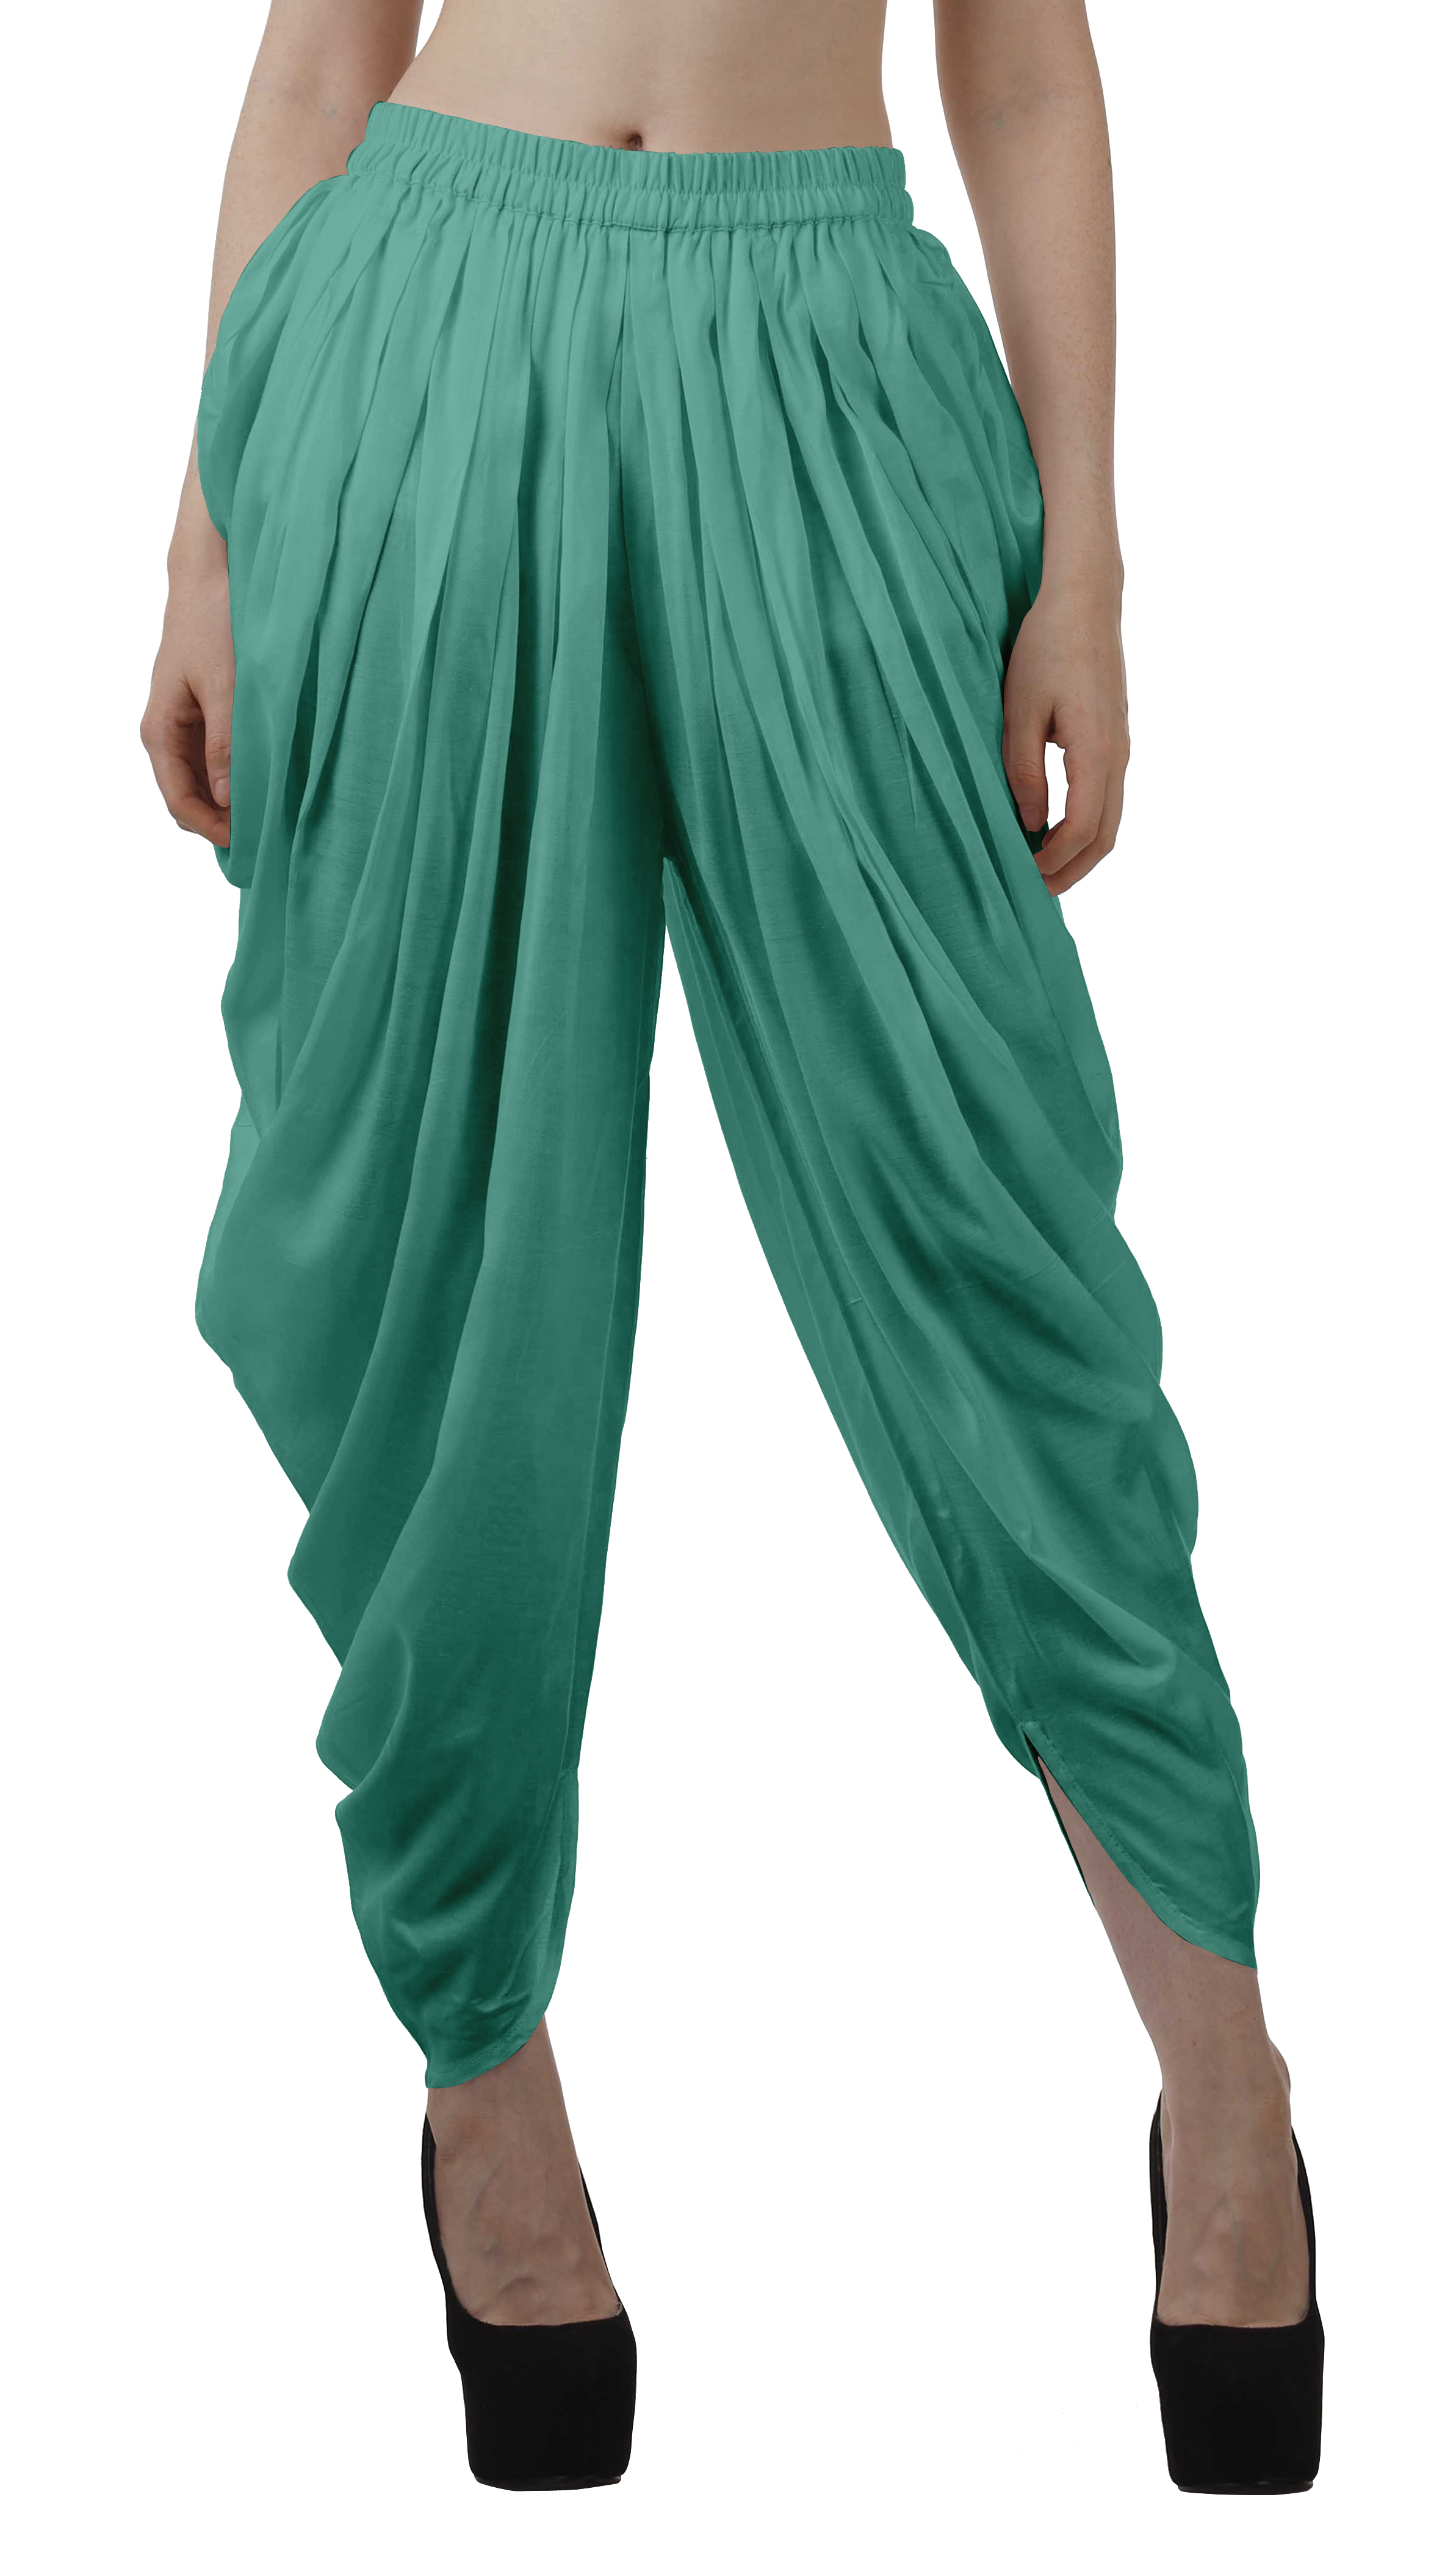 Stretchable Pants In Punjab  Women Stretchable Pants Manufacturers  Suppliers Punjab